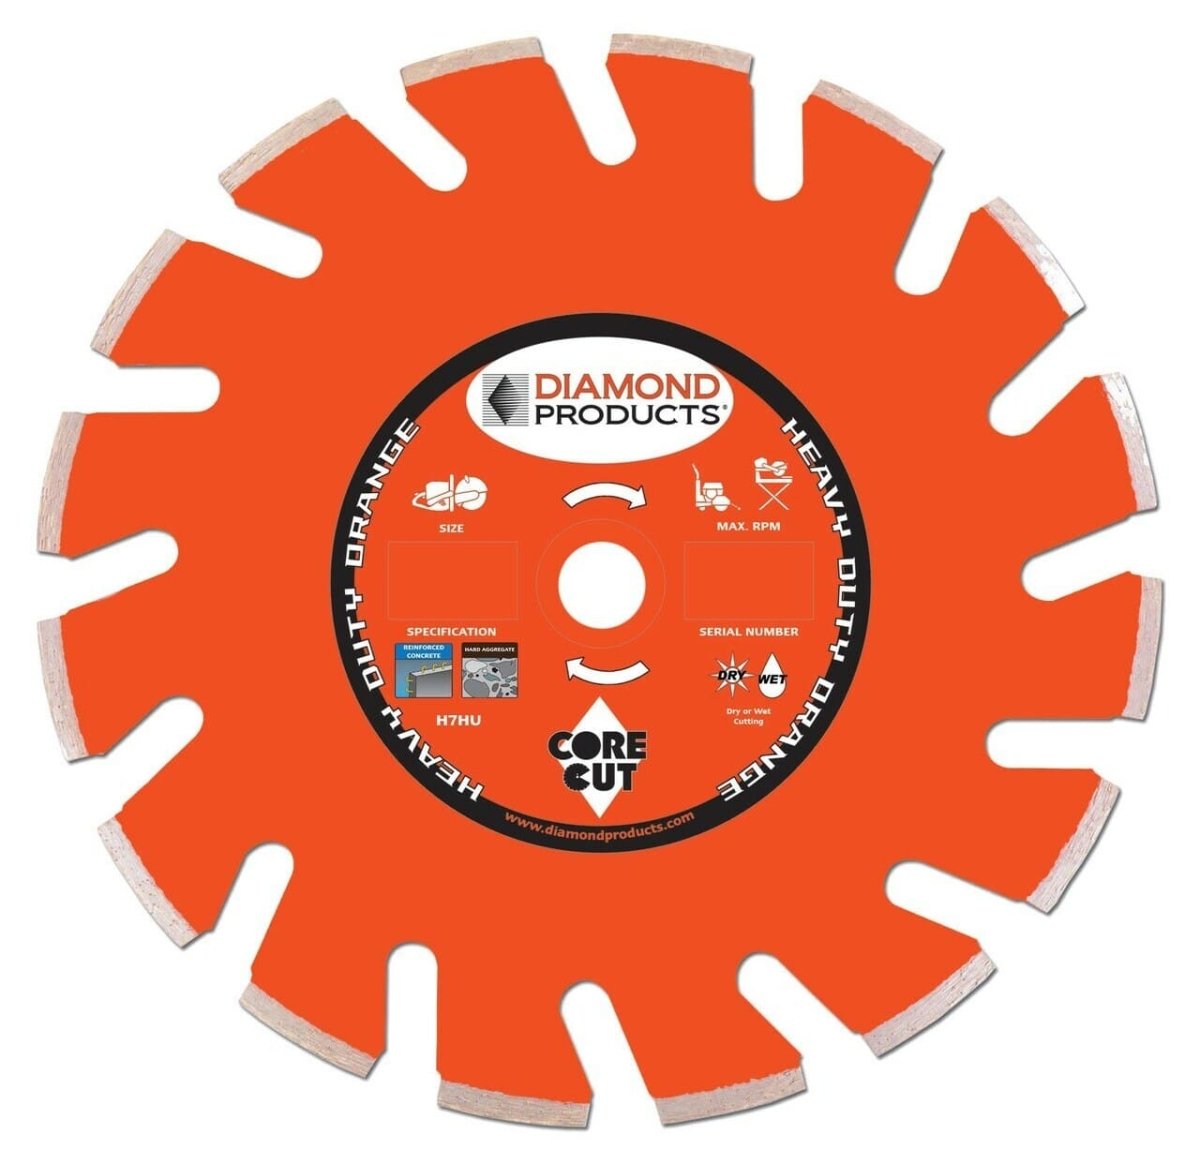 Heavy Duty Orange Ultimate High Speed Diamond Blade for Reinforced Concrete and Hard Materials - Diamond Products